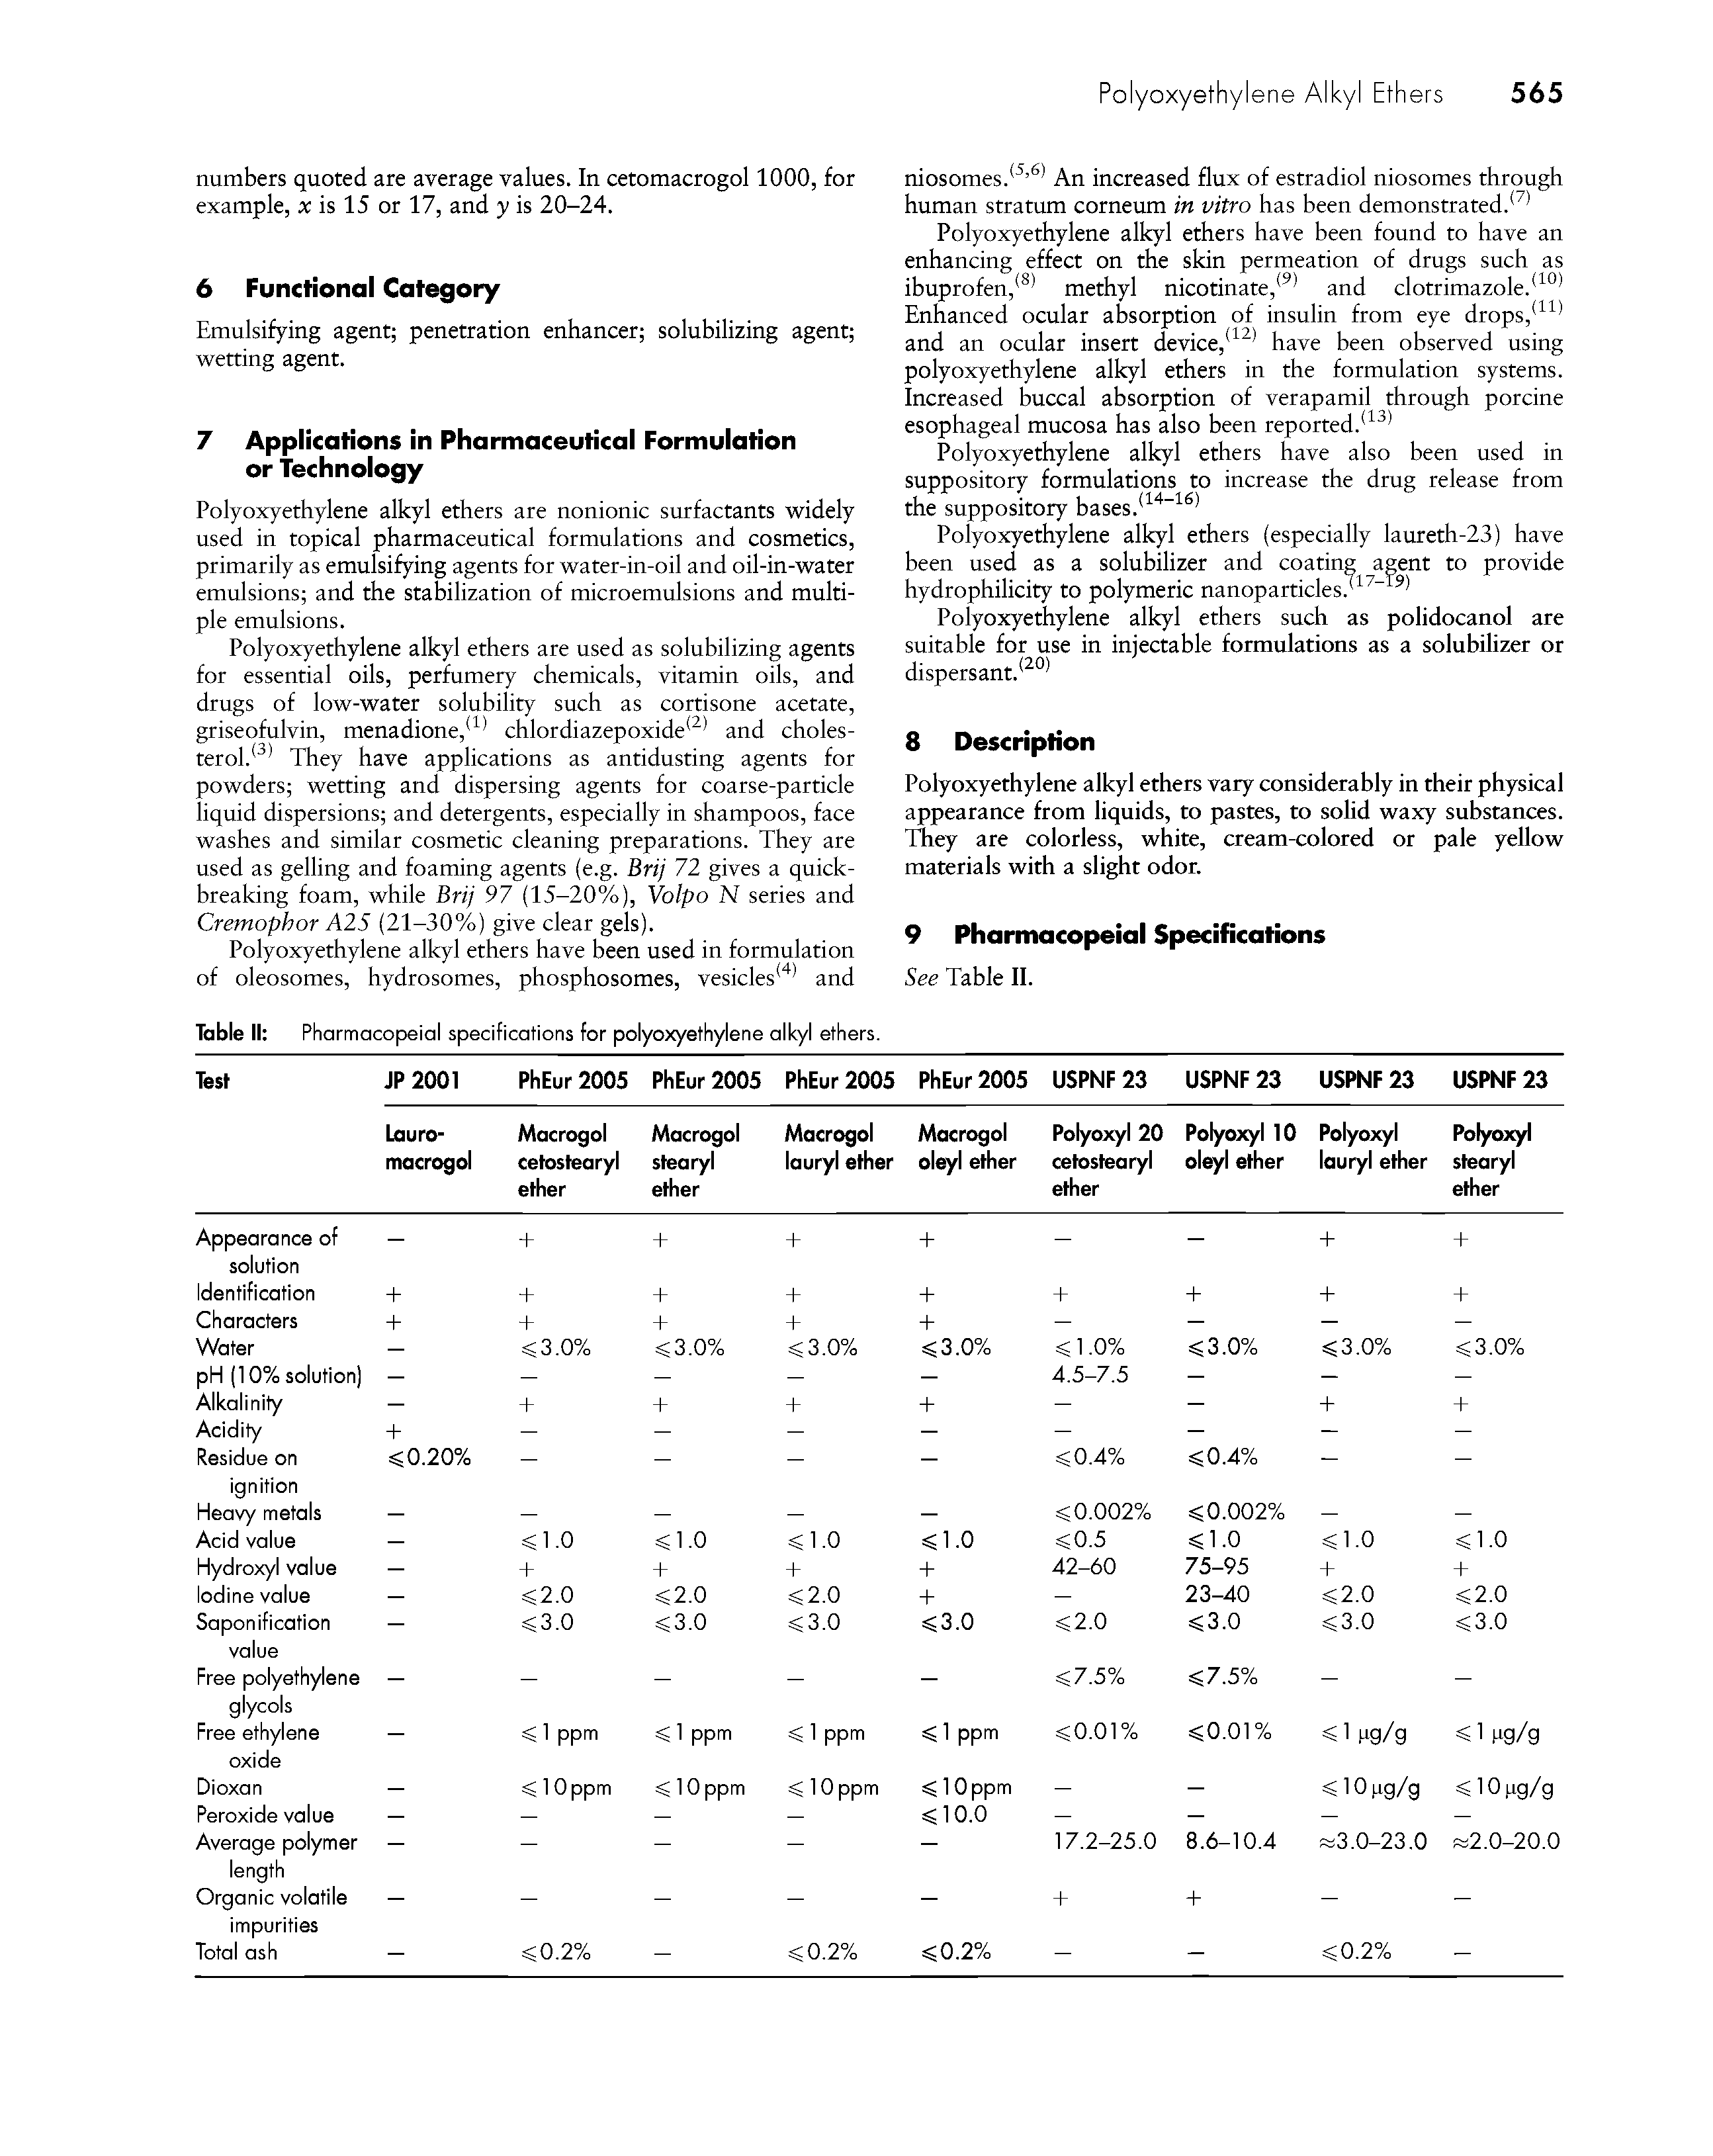 Table II Pharmacopeial specifications for polyoxyethylene alkyl ethers.